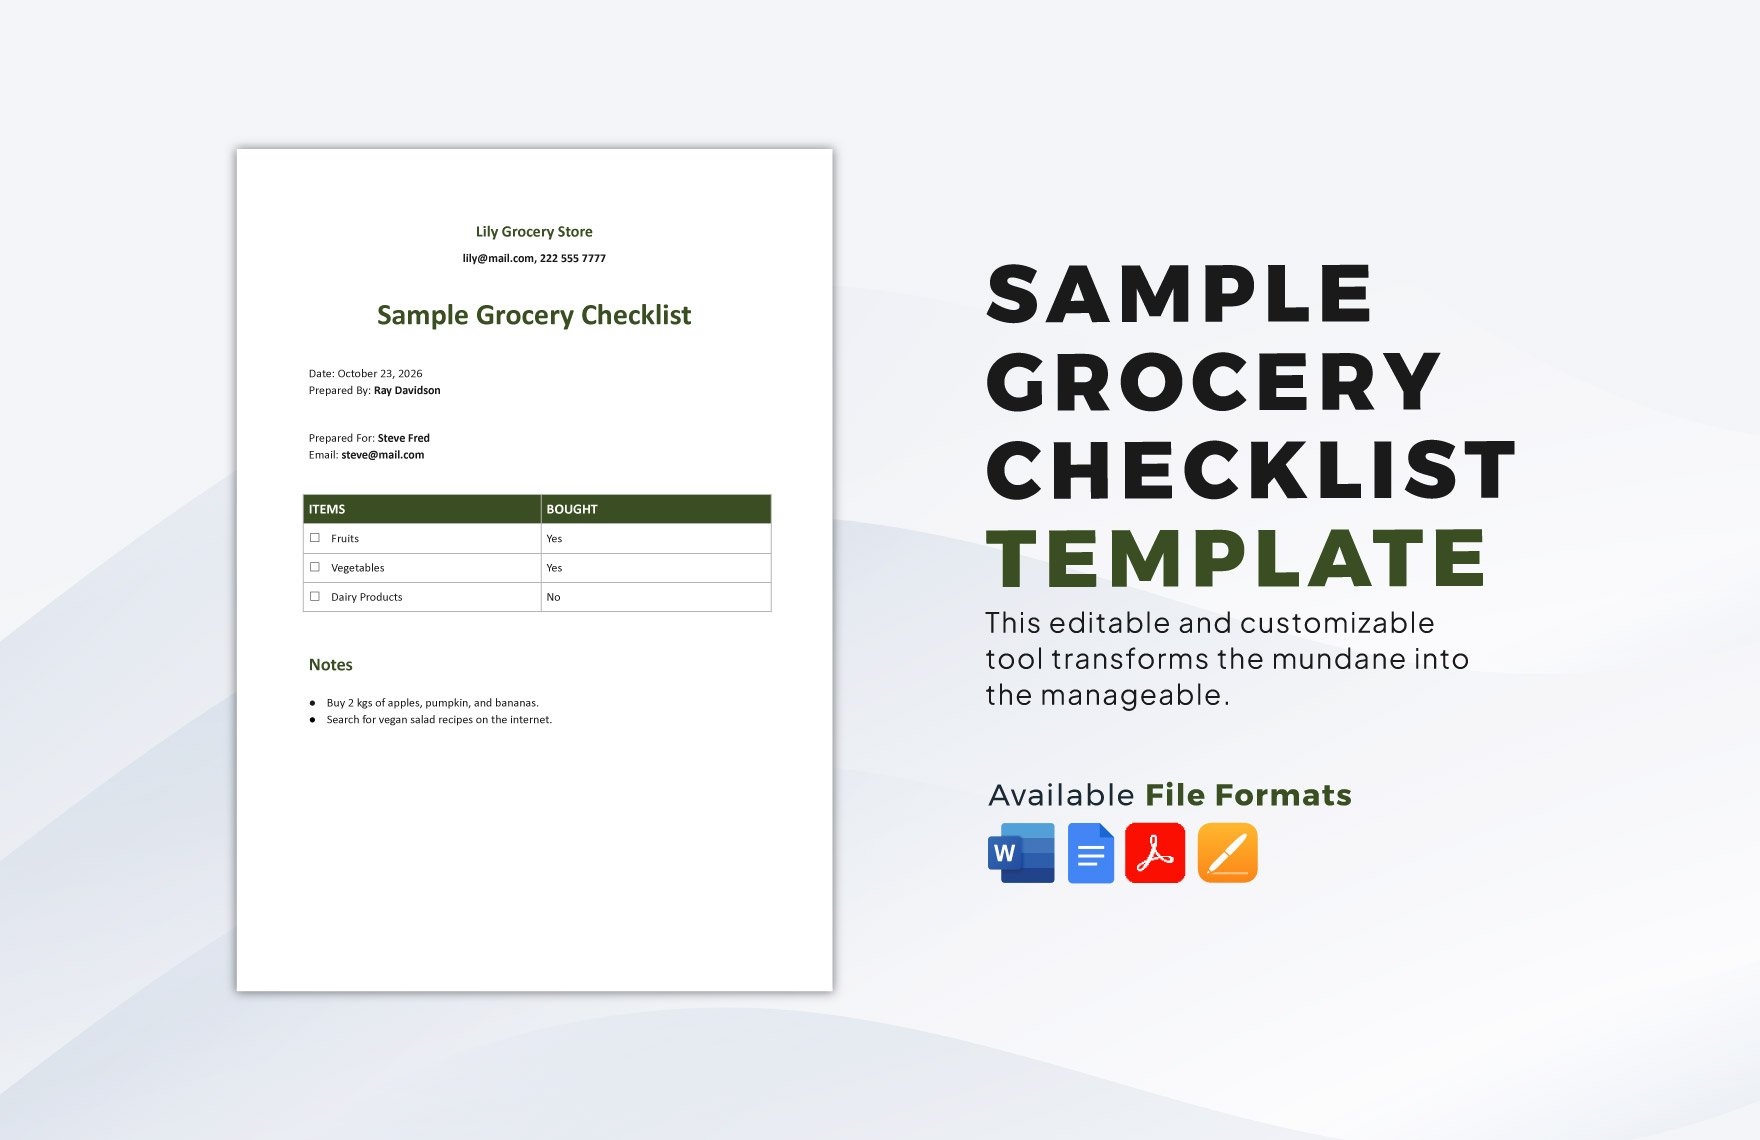 Sample Grocery Checklist Template